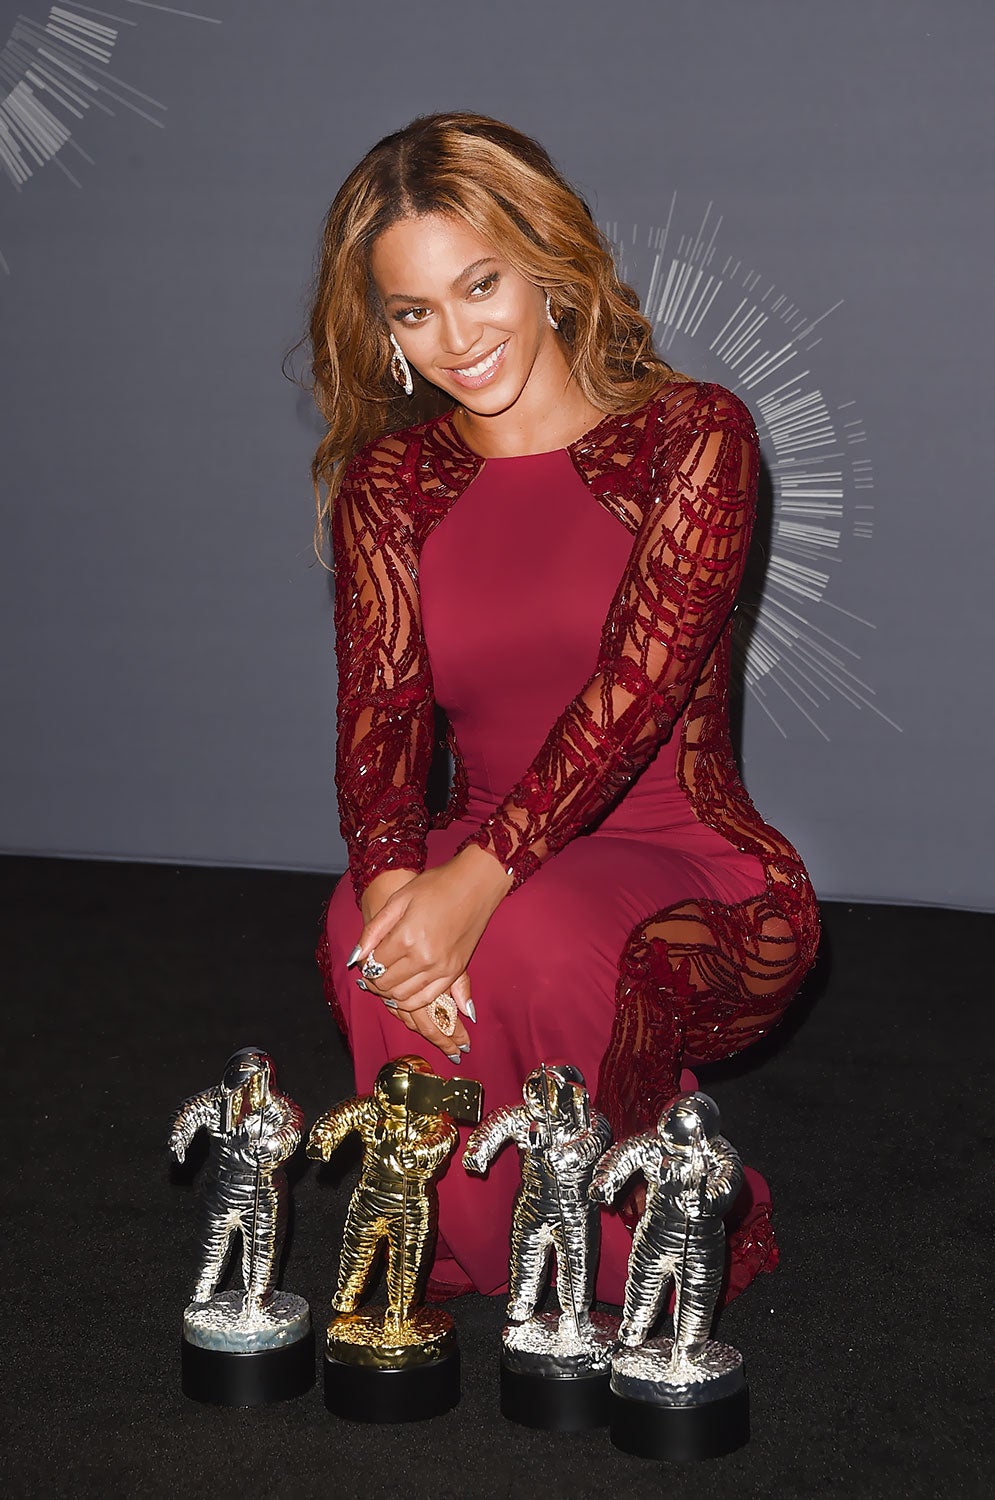 Relive the Fun from Last Year's VMAs!
